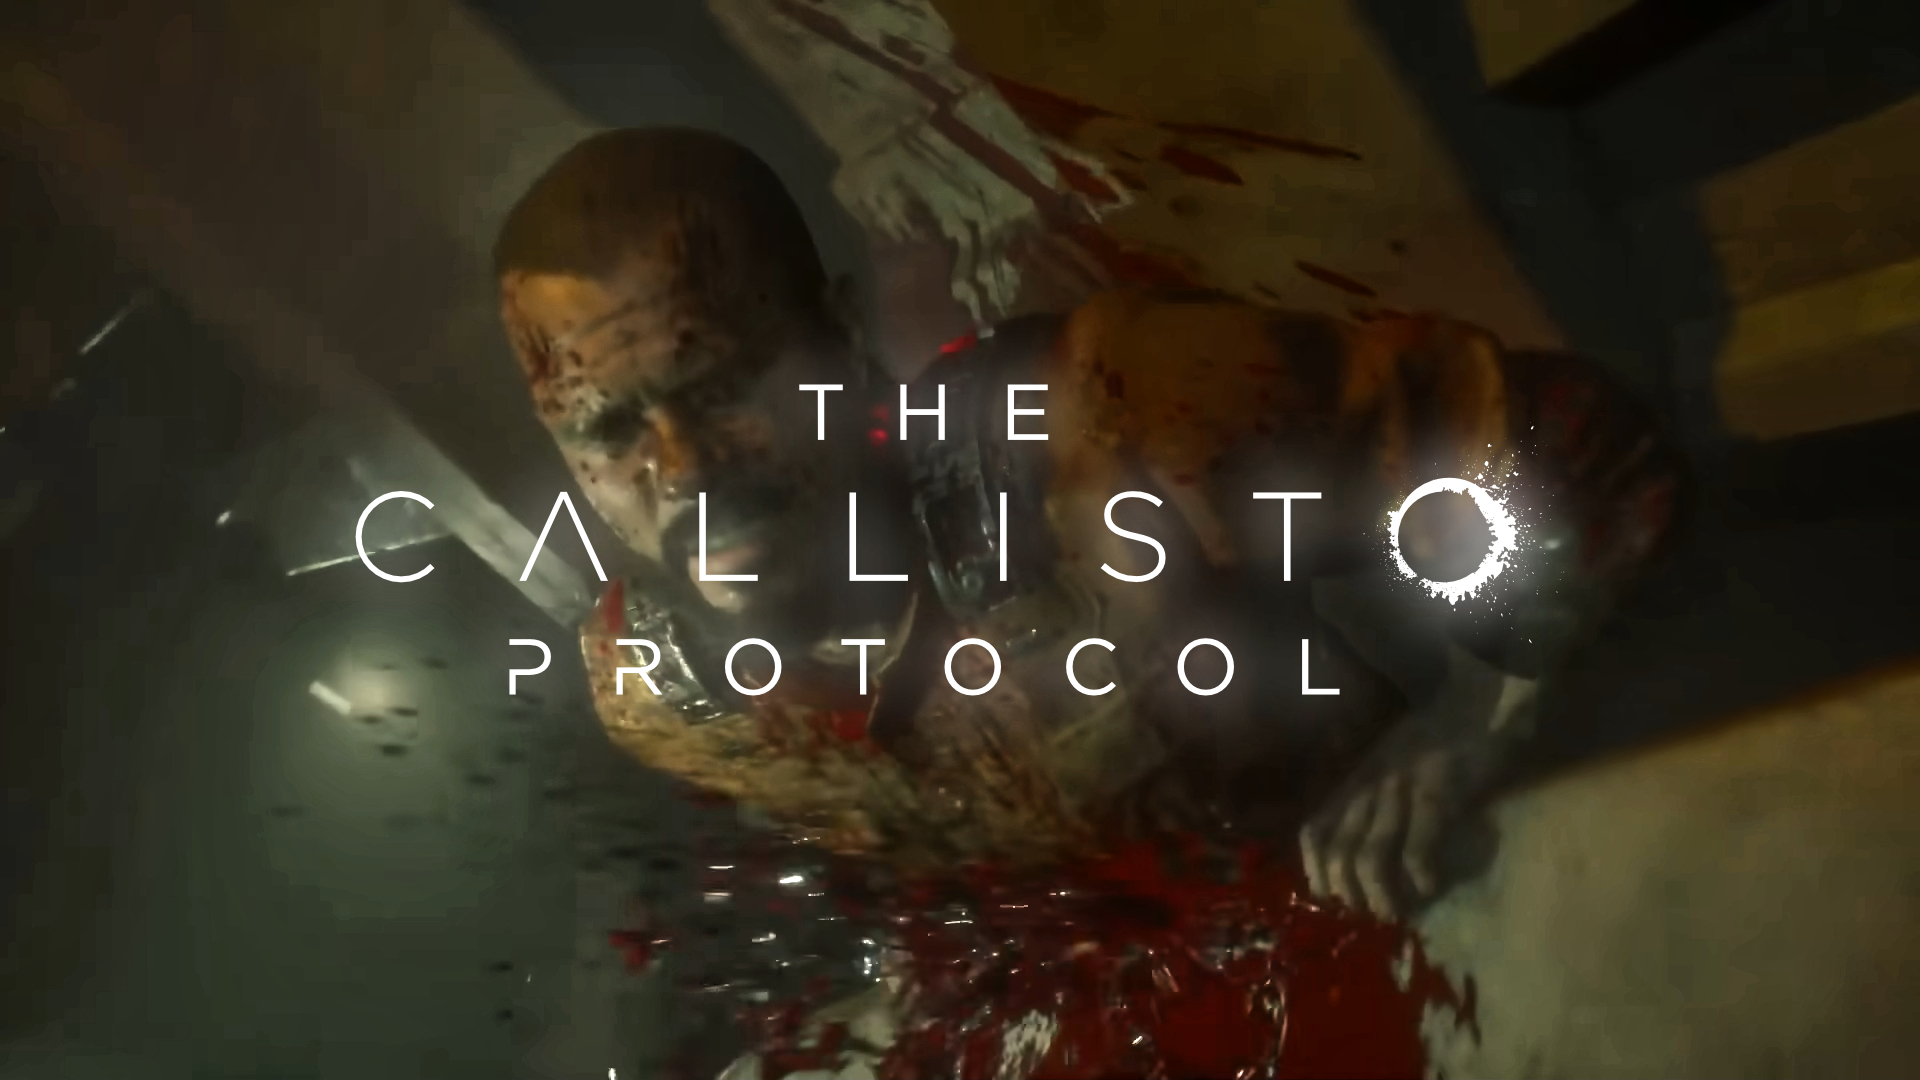 The Callisto Protocol's Final Transmission DLC Launches First On